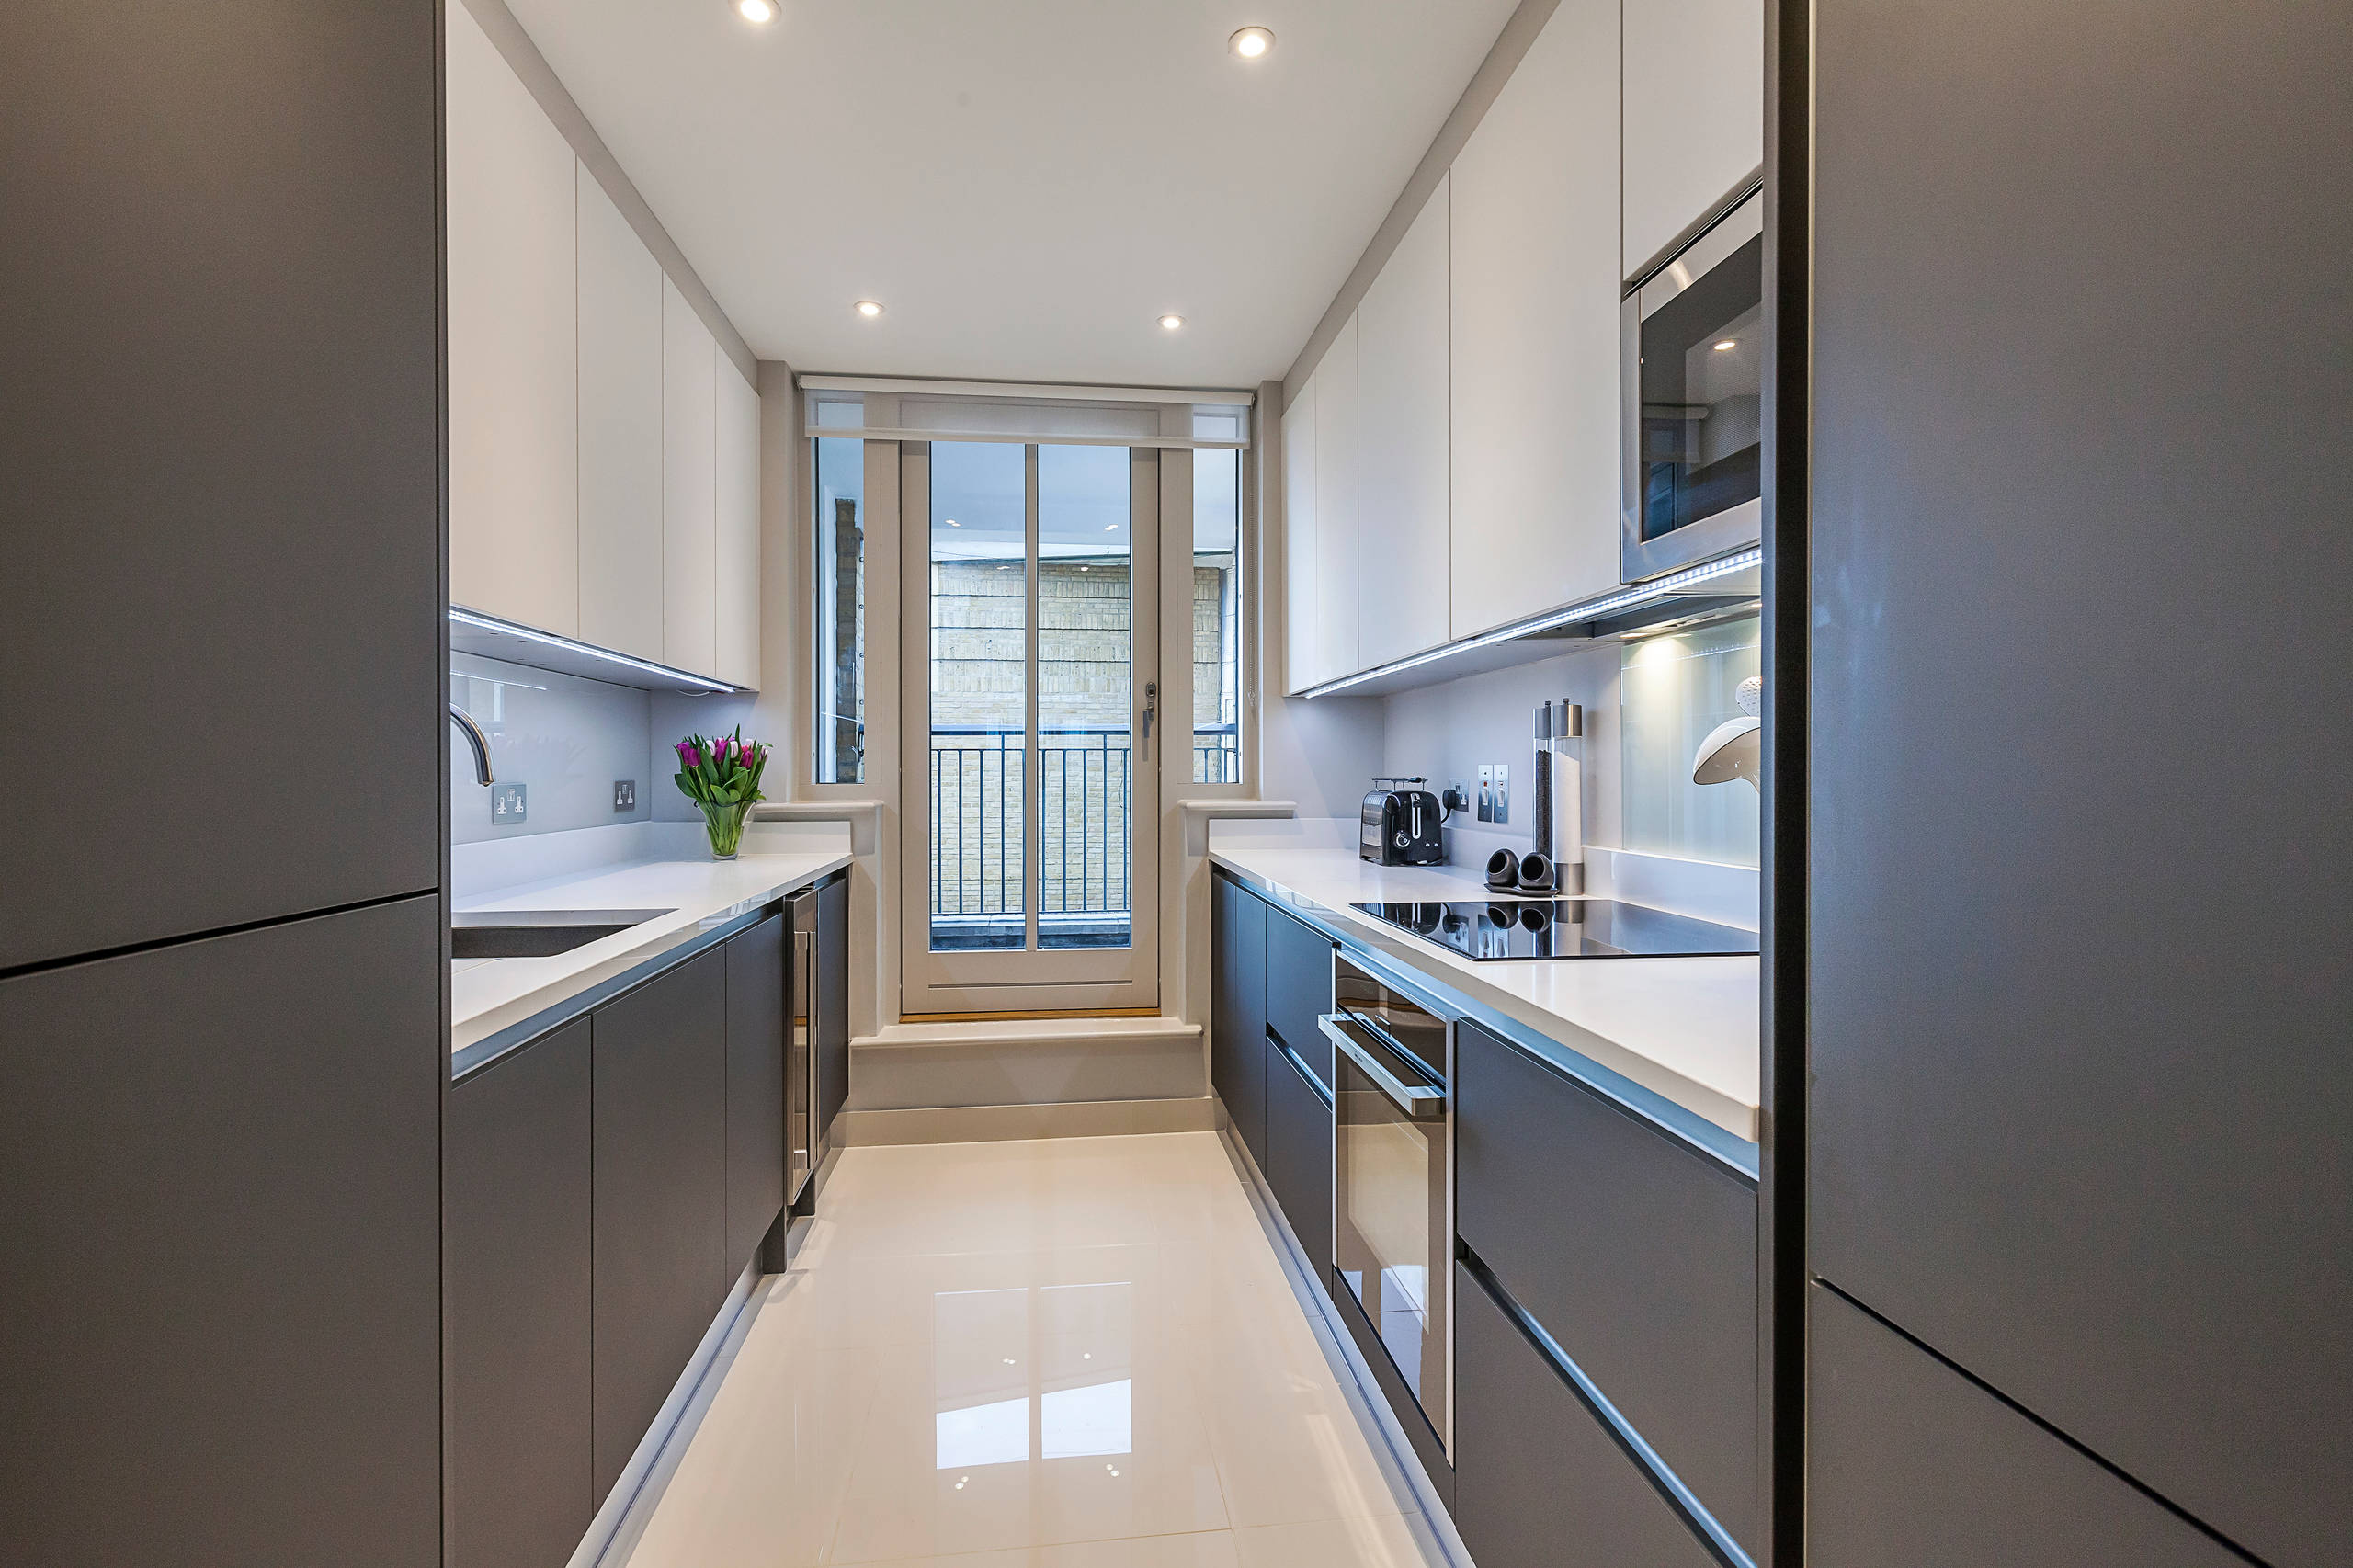 Space enhancing tips for small galley kitchens   Houzz UK